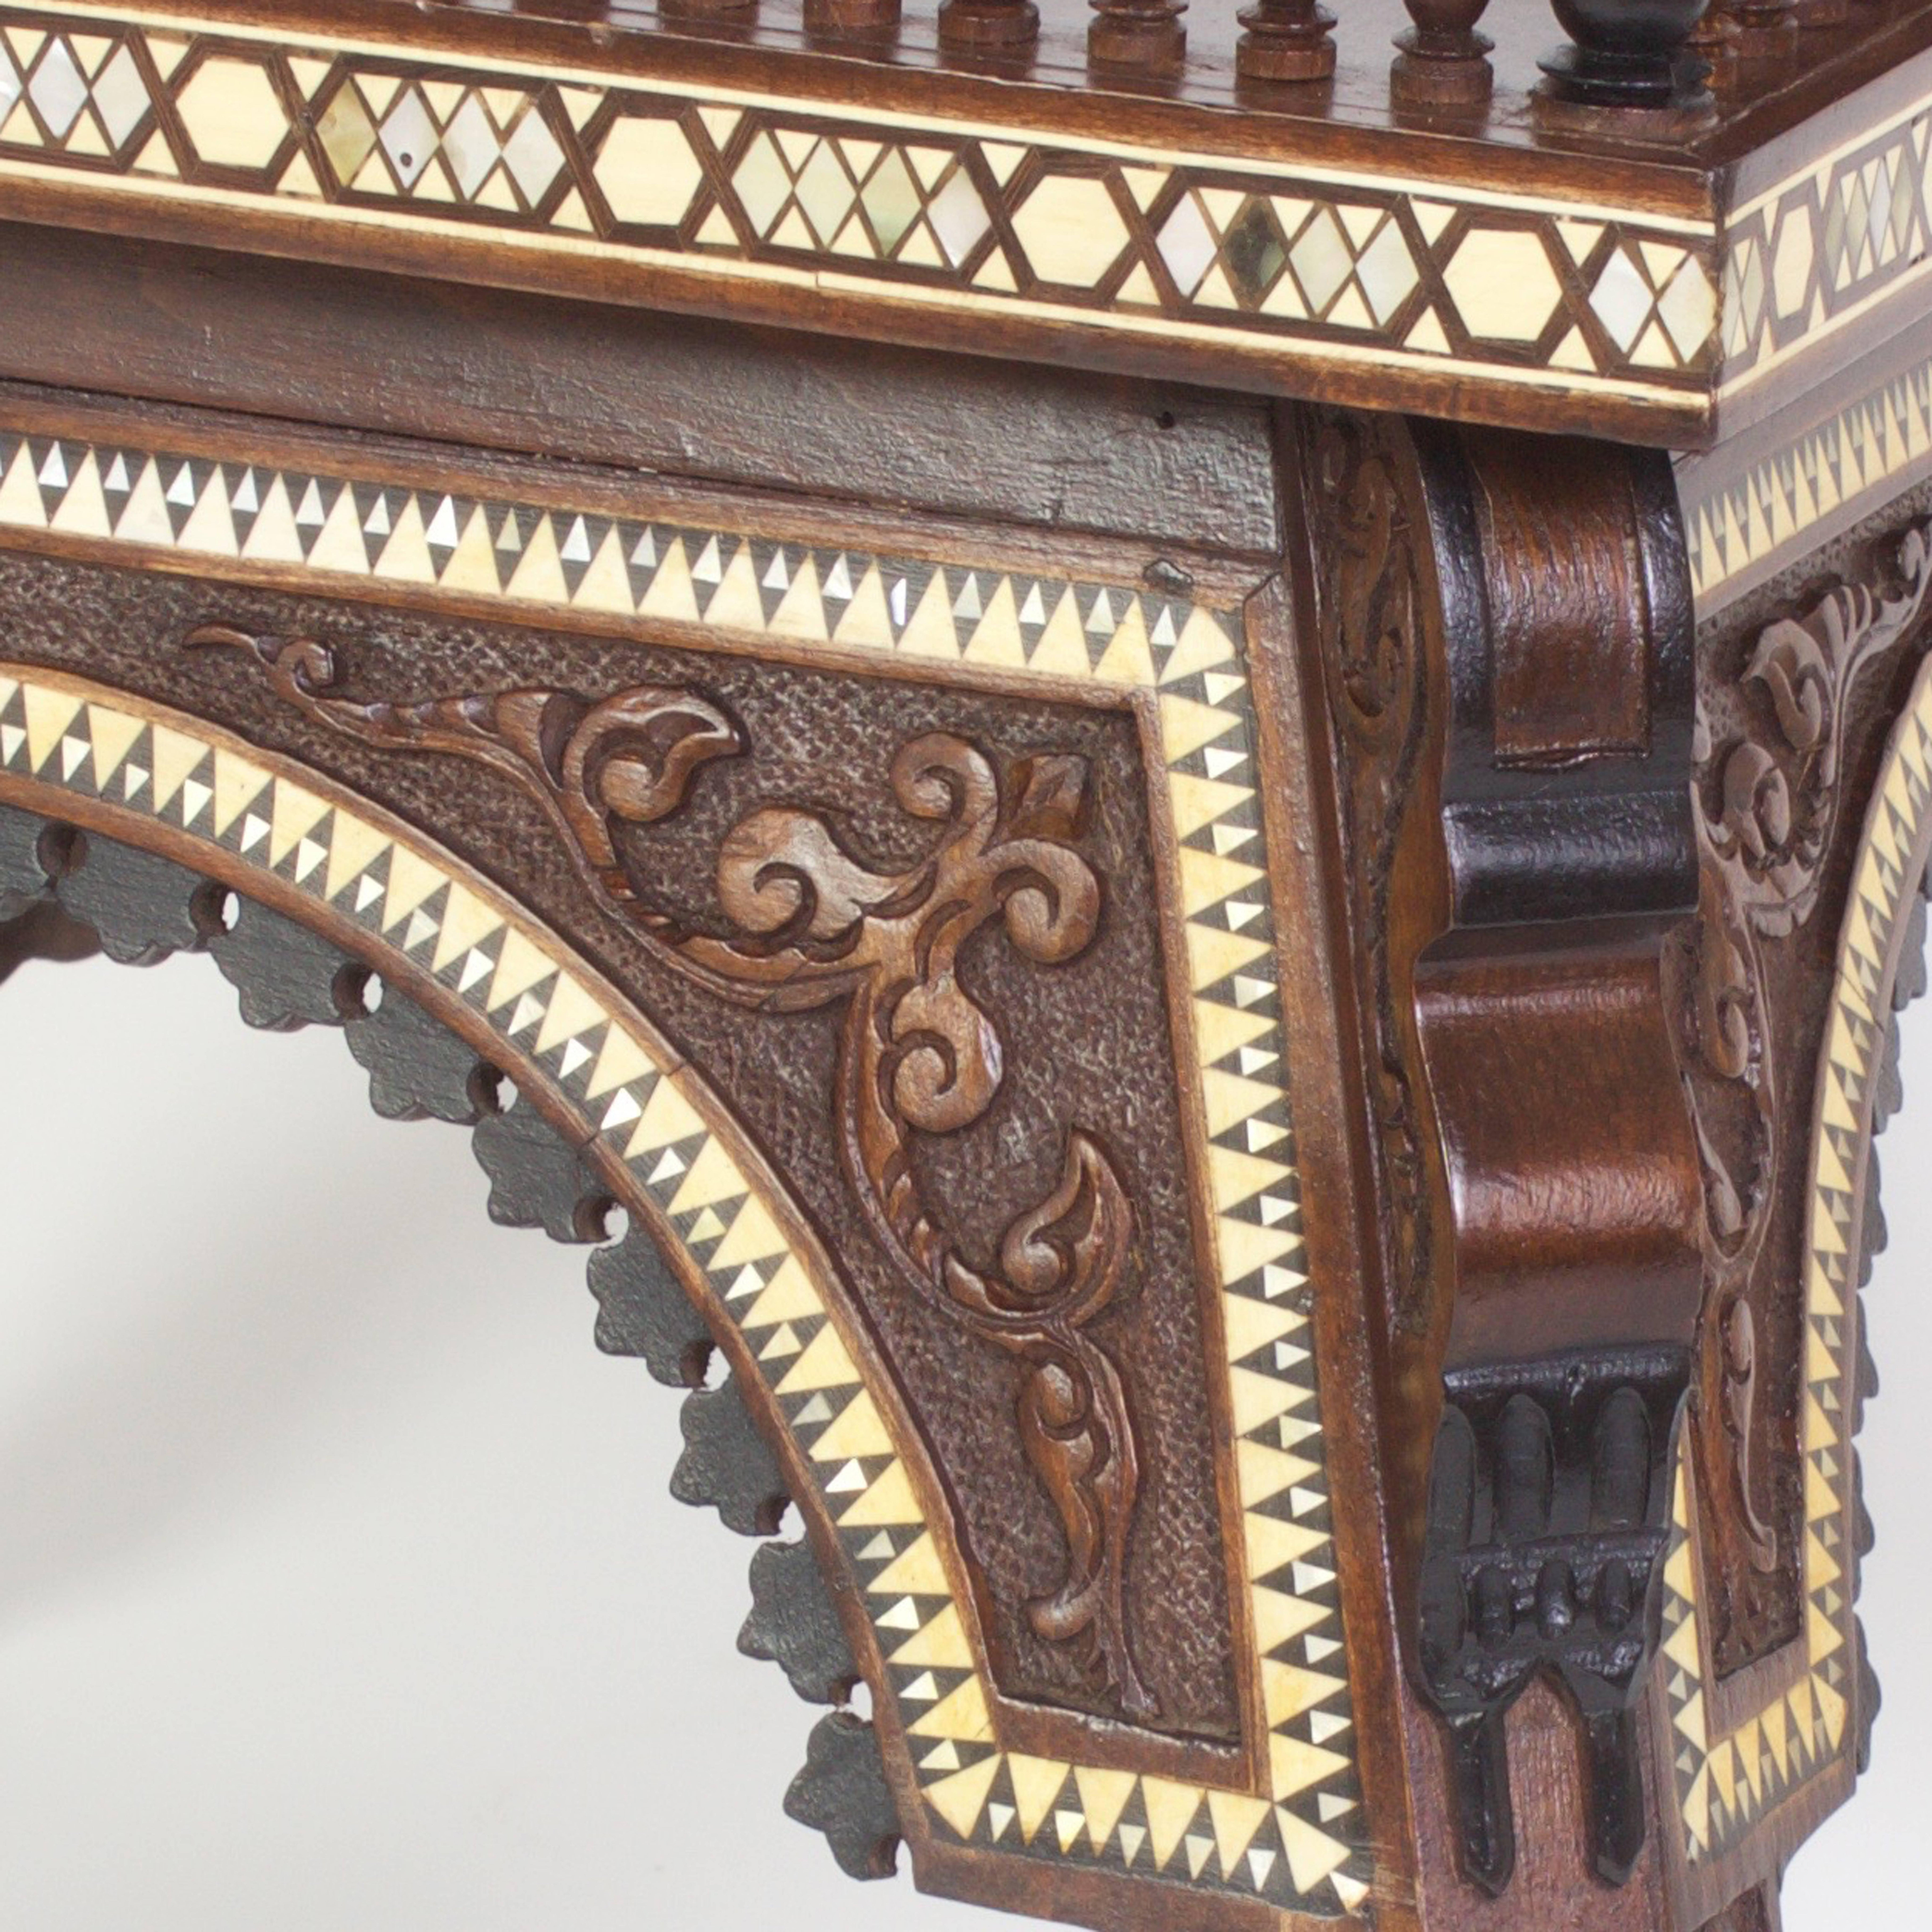 Moorish Bone Inlaid Tables with Floral Carvings and Porcelain 2